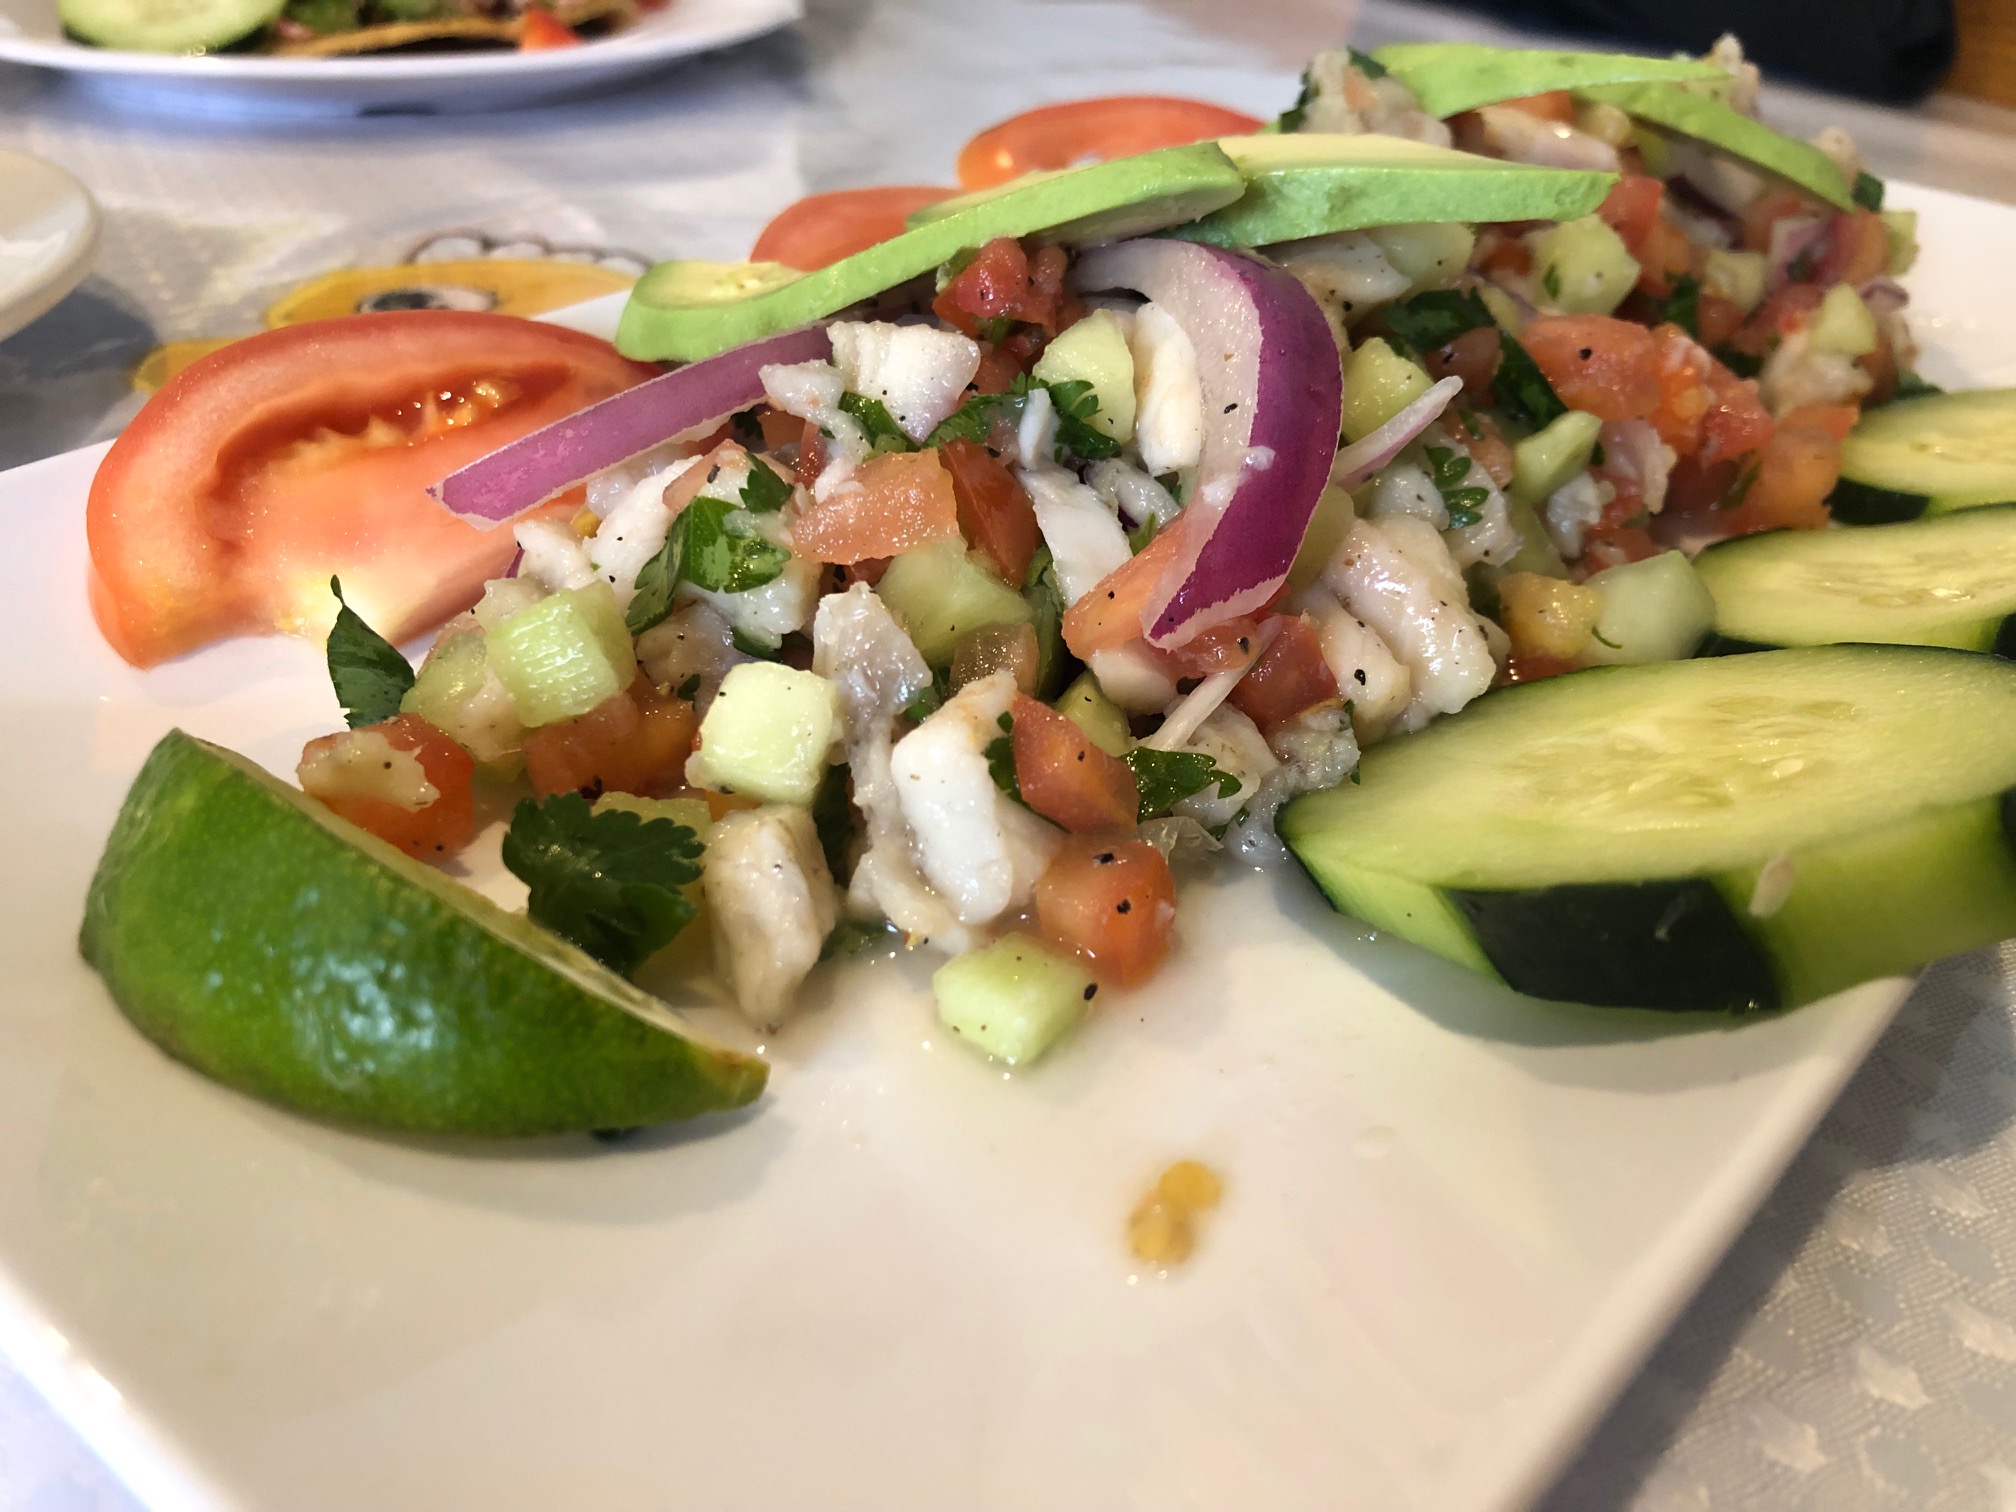 On a white plate, there is ceviche with white fish, limes, sliced cucumbers, and diced veggies. Photo by Alyssa Buckley.